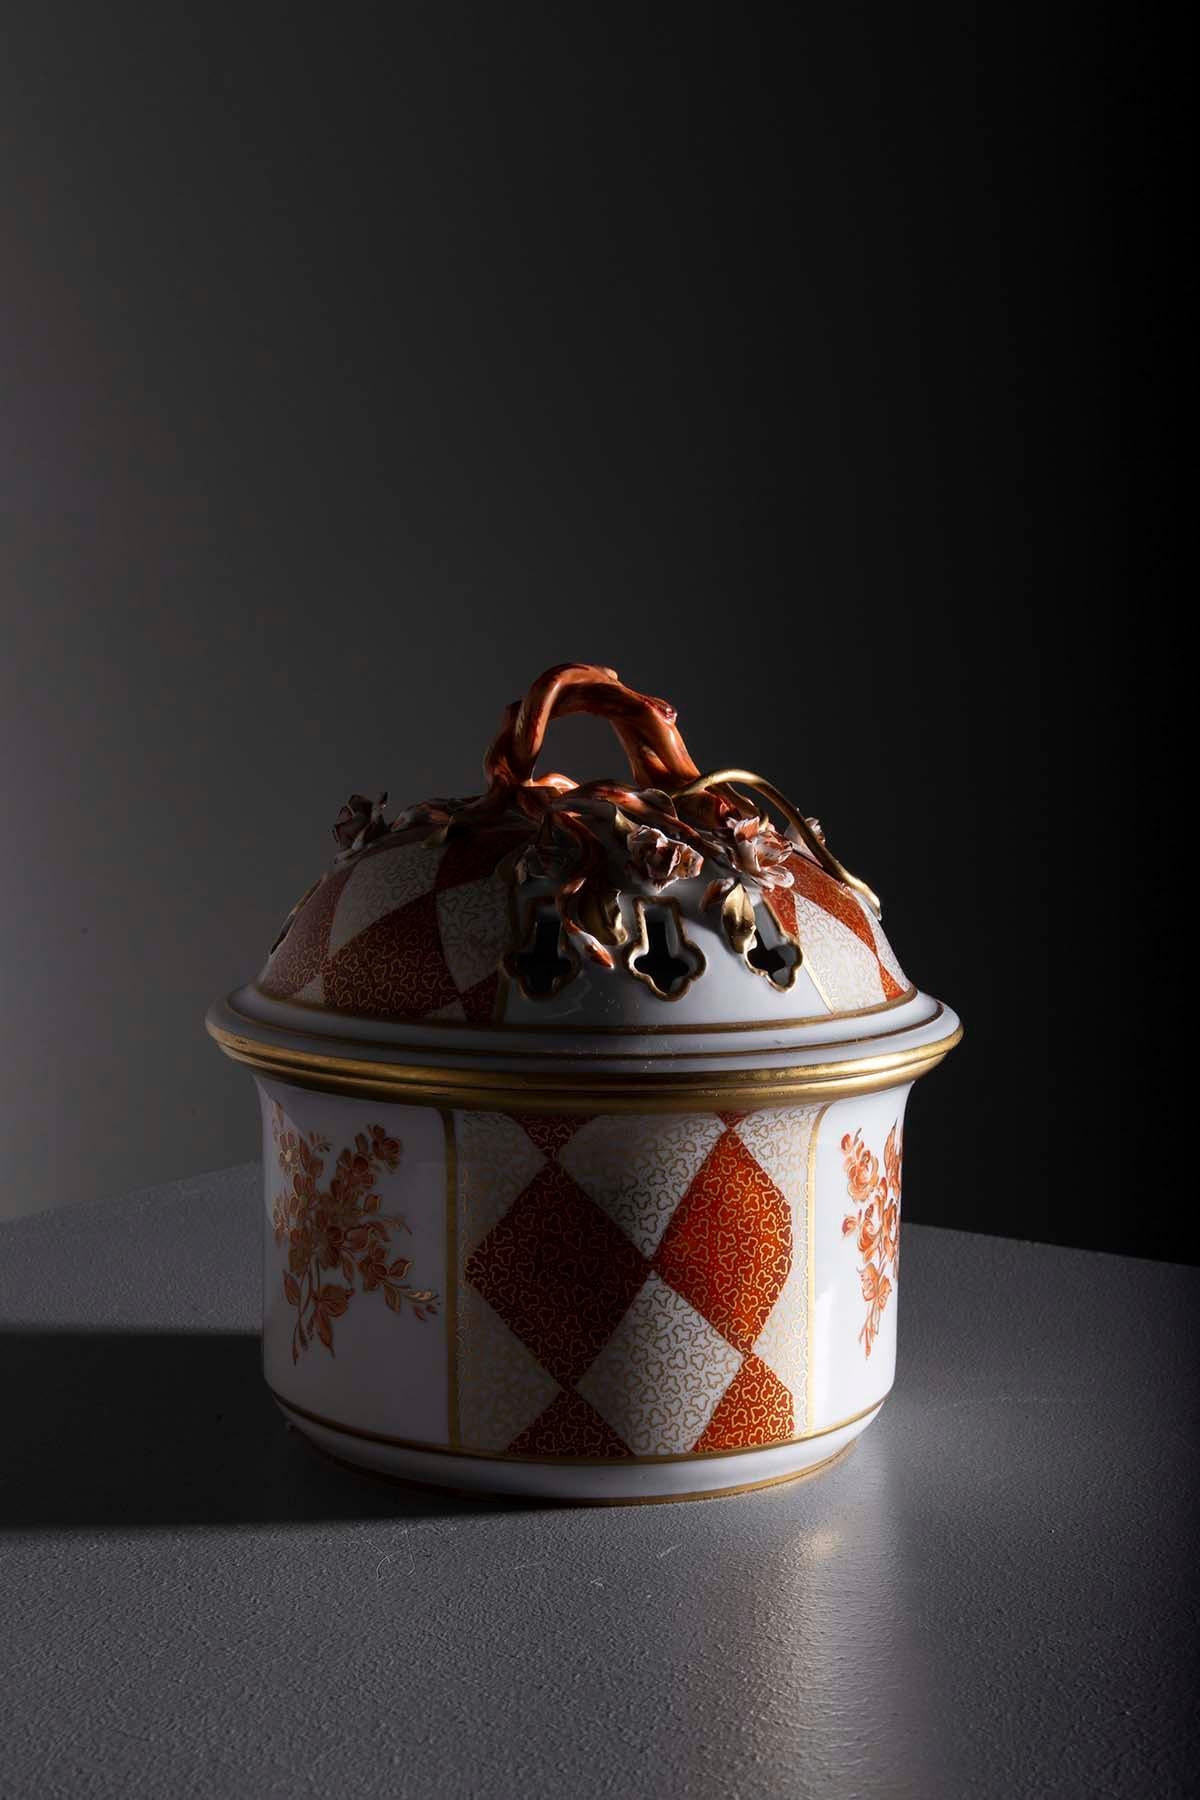 Immerse yourself in timeless art with this exceptional biscuit jar made of exquisite Sèvres porcelain. The Sèvres mark on the base confirms its authenticity and origin from one of the world's most illustrious porcelain manufactories. Founded in 1738